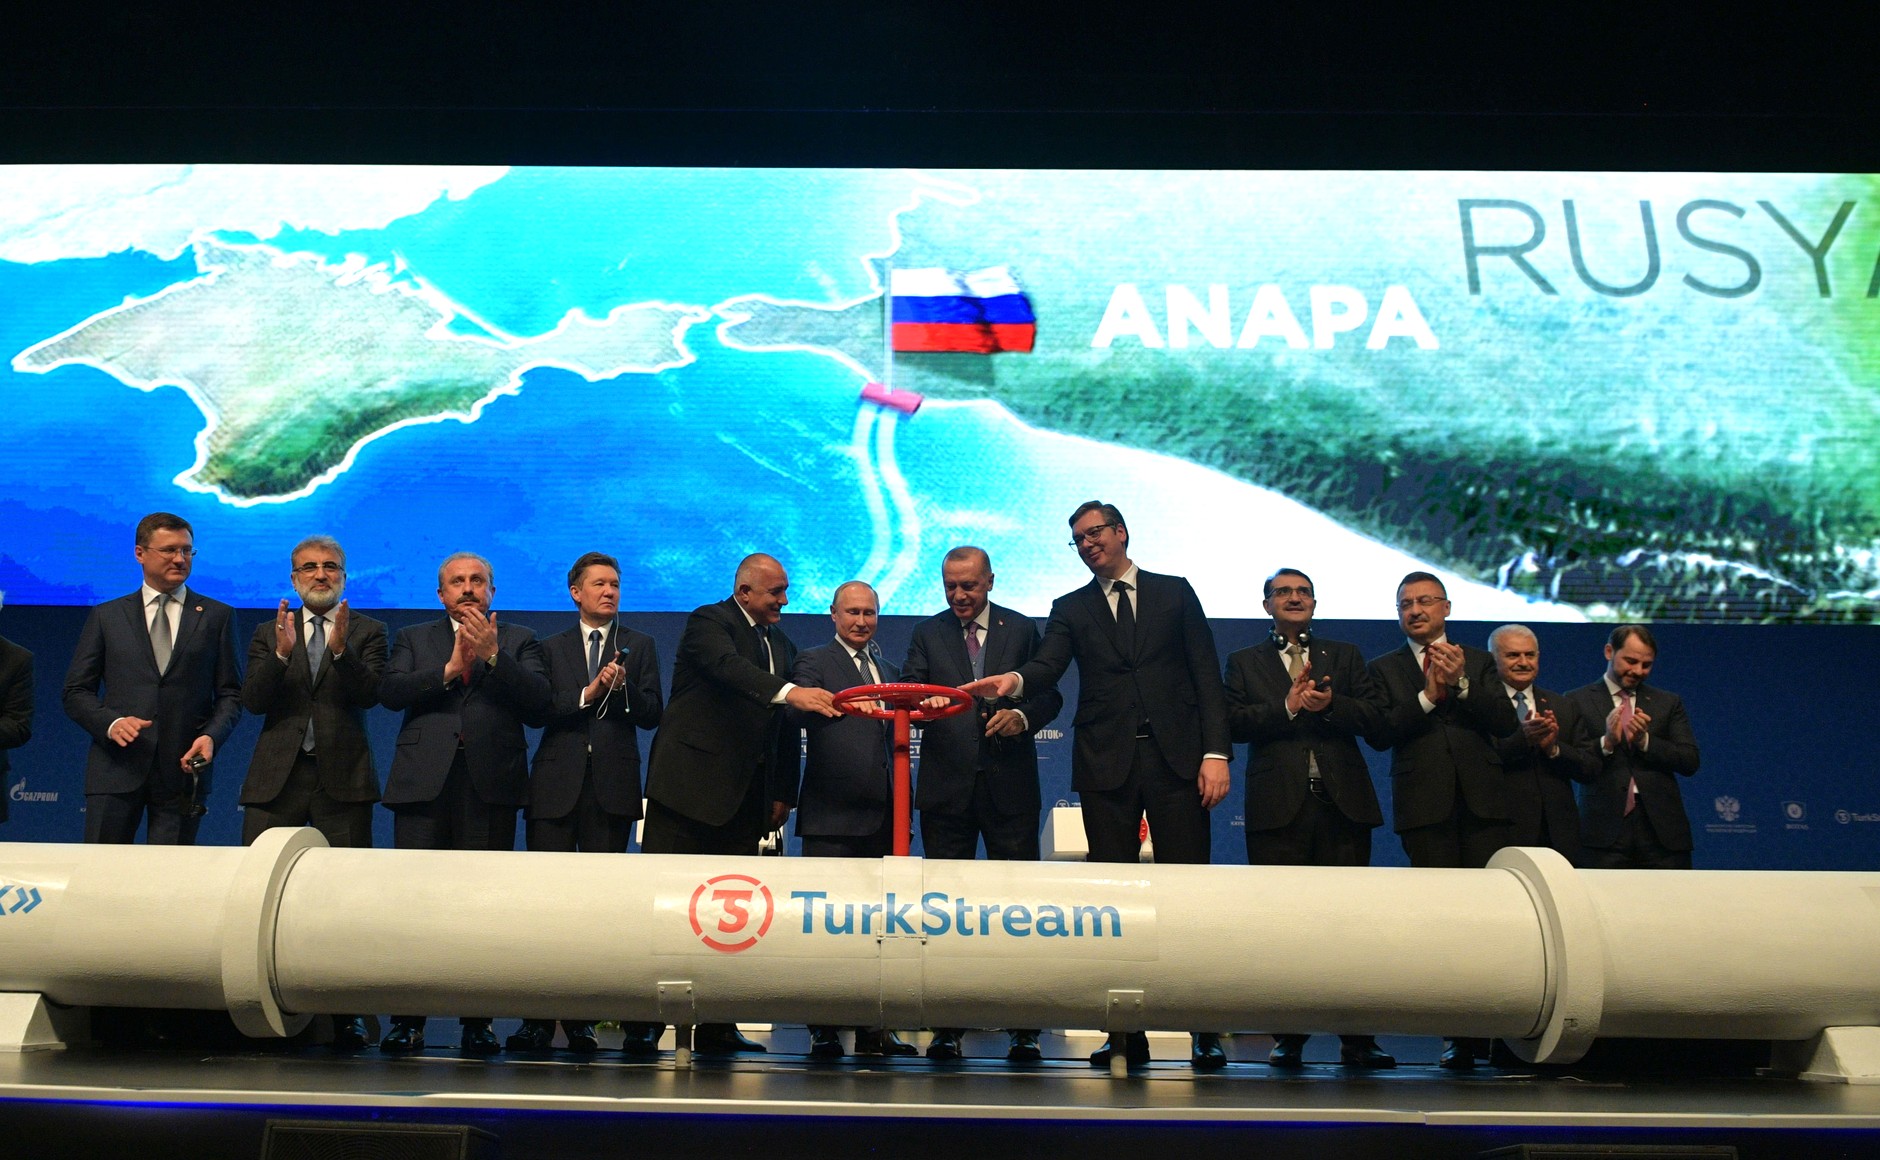 Presidents Vladimir Putin of Russia and Recep Tayyip Erdoğan of Turkey at the ceremony to launch the TurkStream gas pipeline.